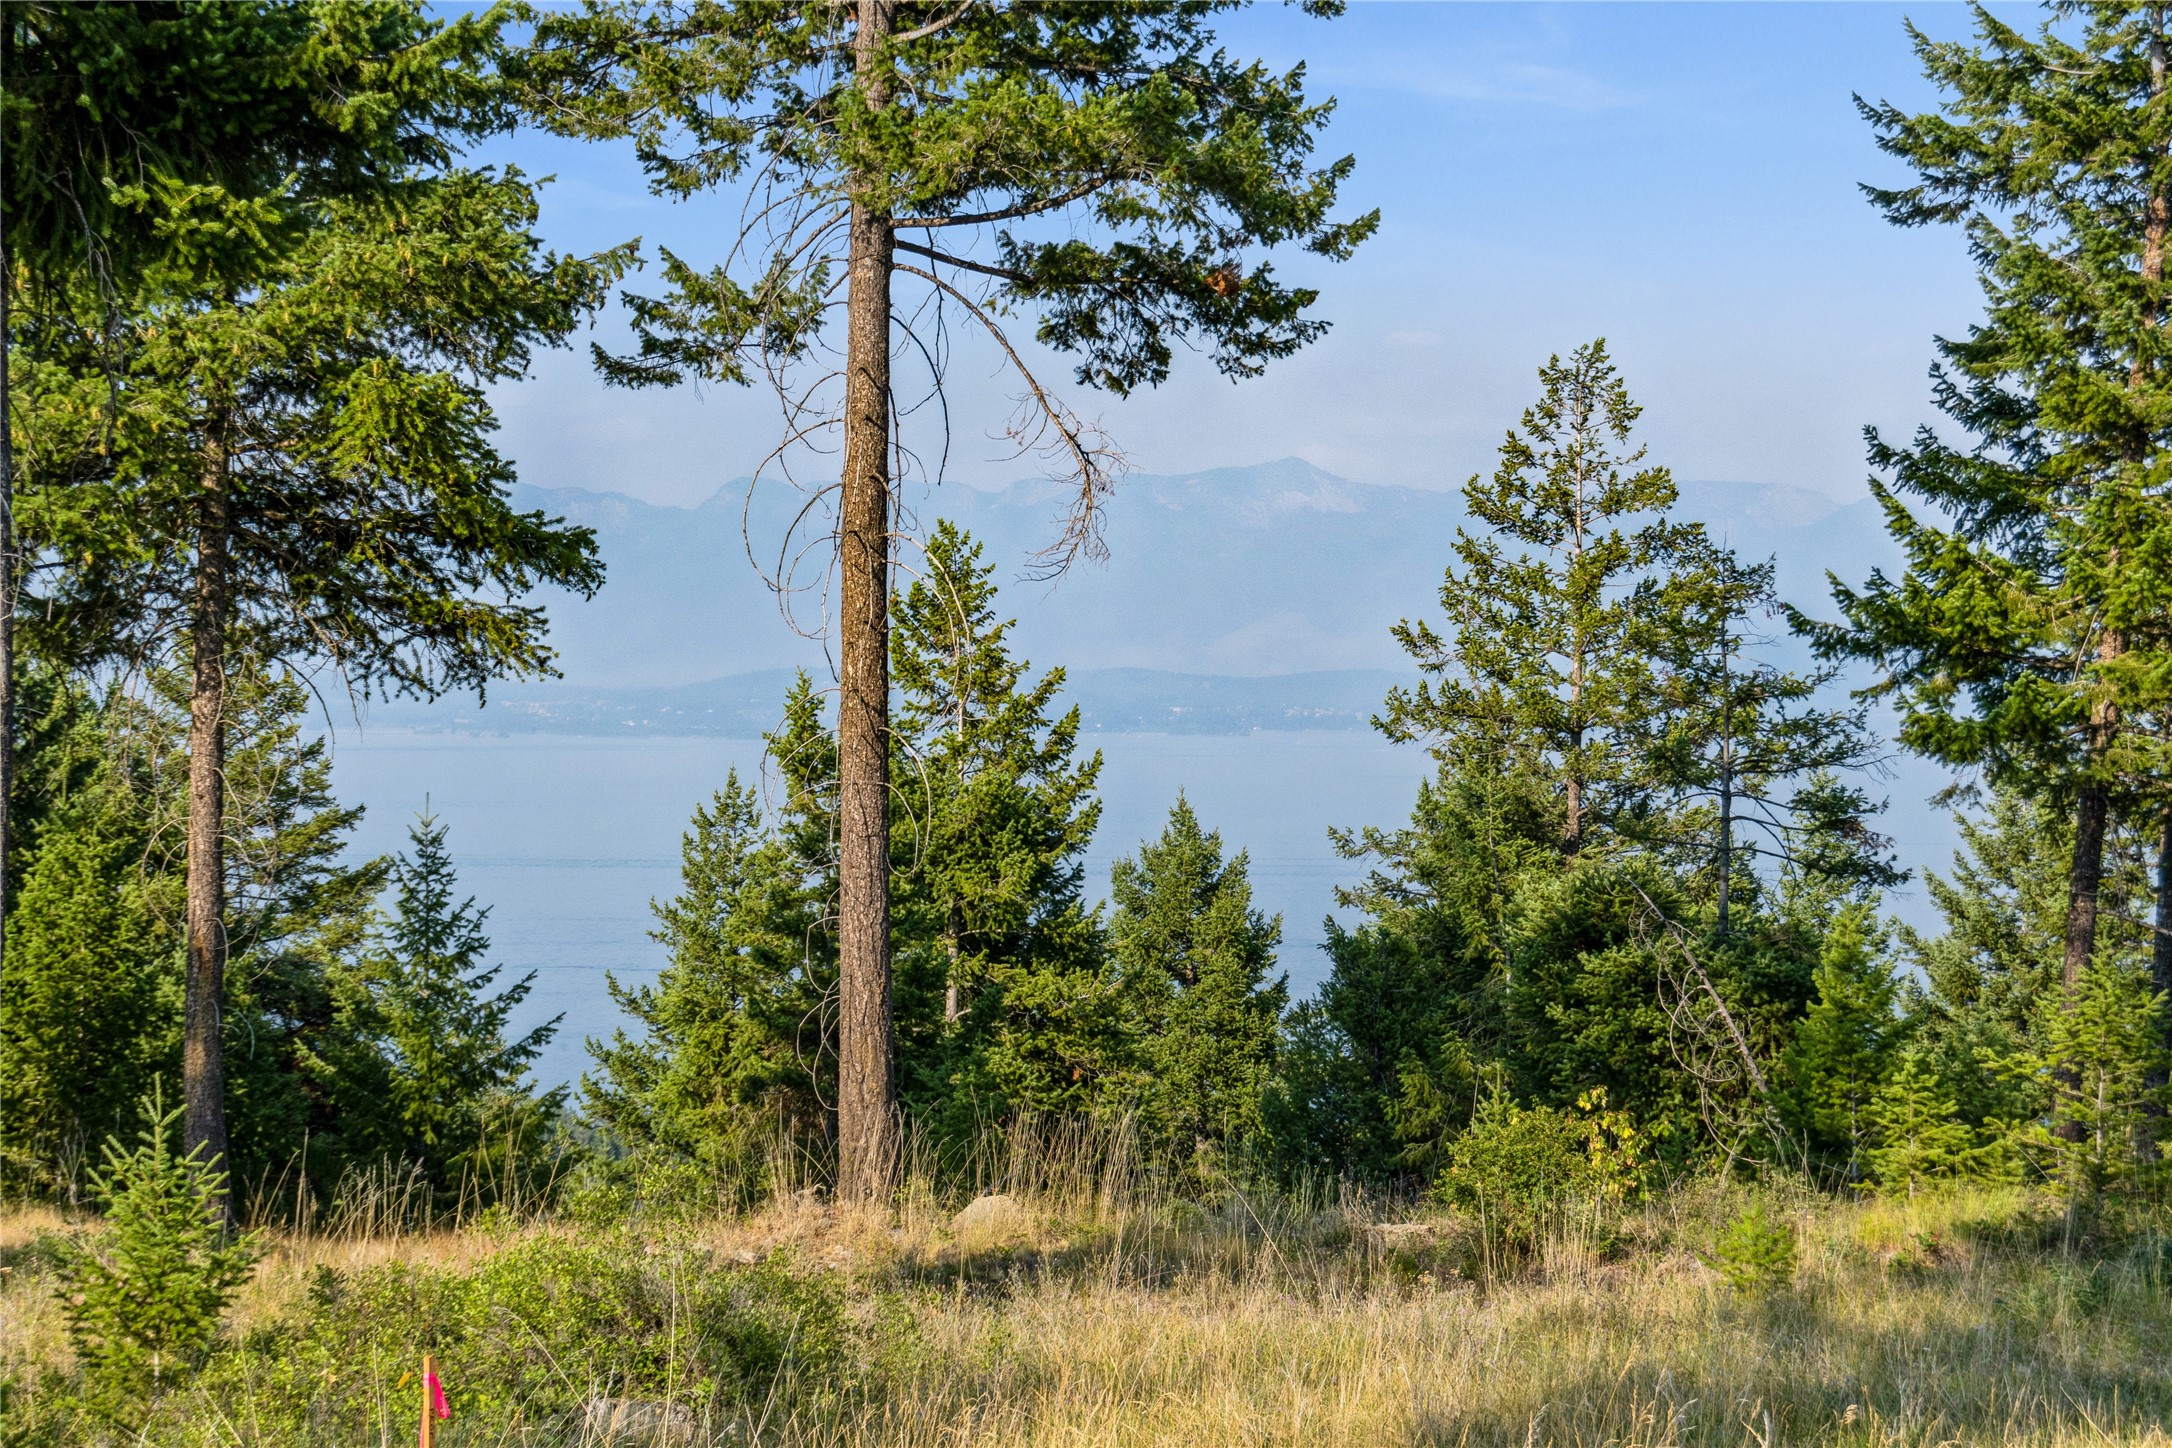 Views for days from this beautiful 3 acres located in the gated community of Lakeside Club.  Private access along with views of Flathead Lake are just a few of the perks.  This lot has a level building site along with power to the property.  Easy access from the main road.